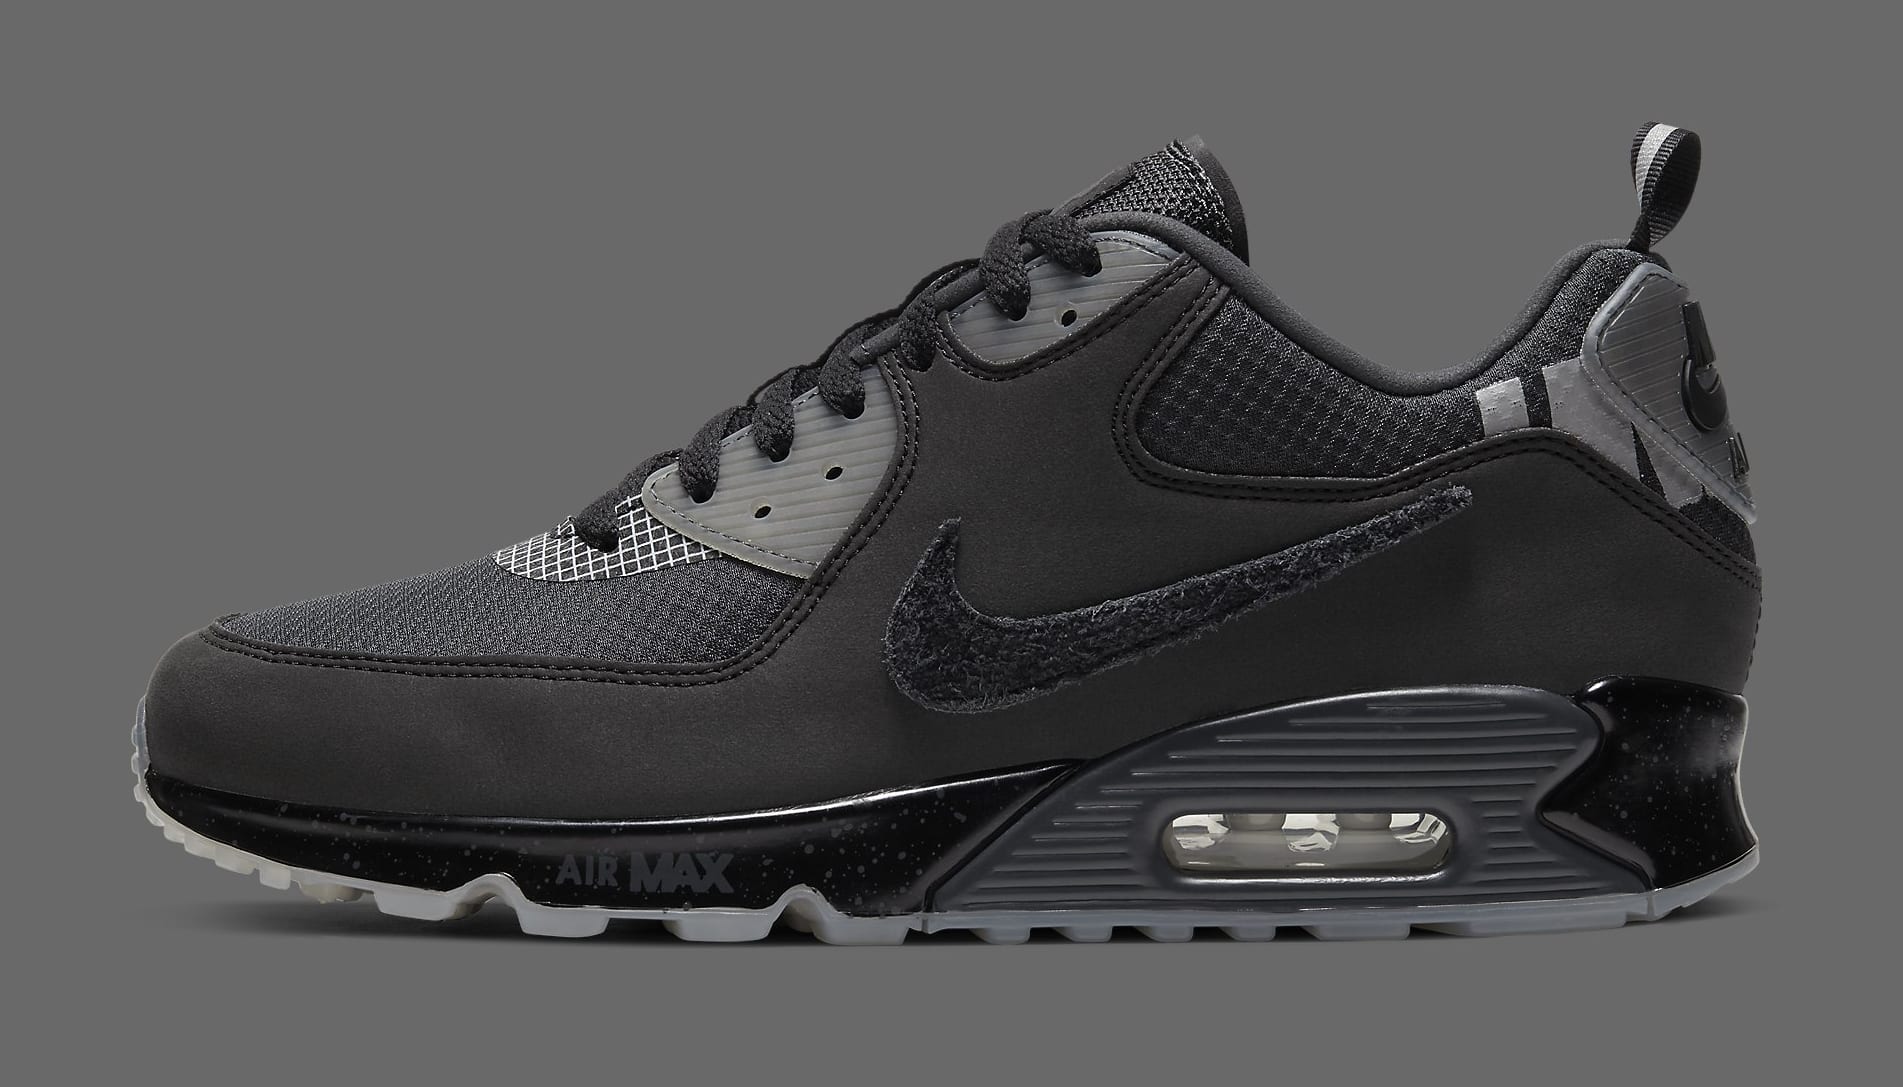 undefeated-nike-air-max-90-black-cq2289-002-lateral